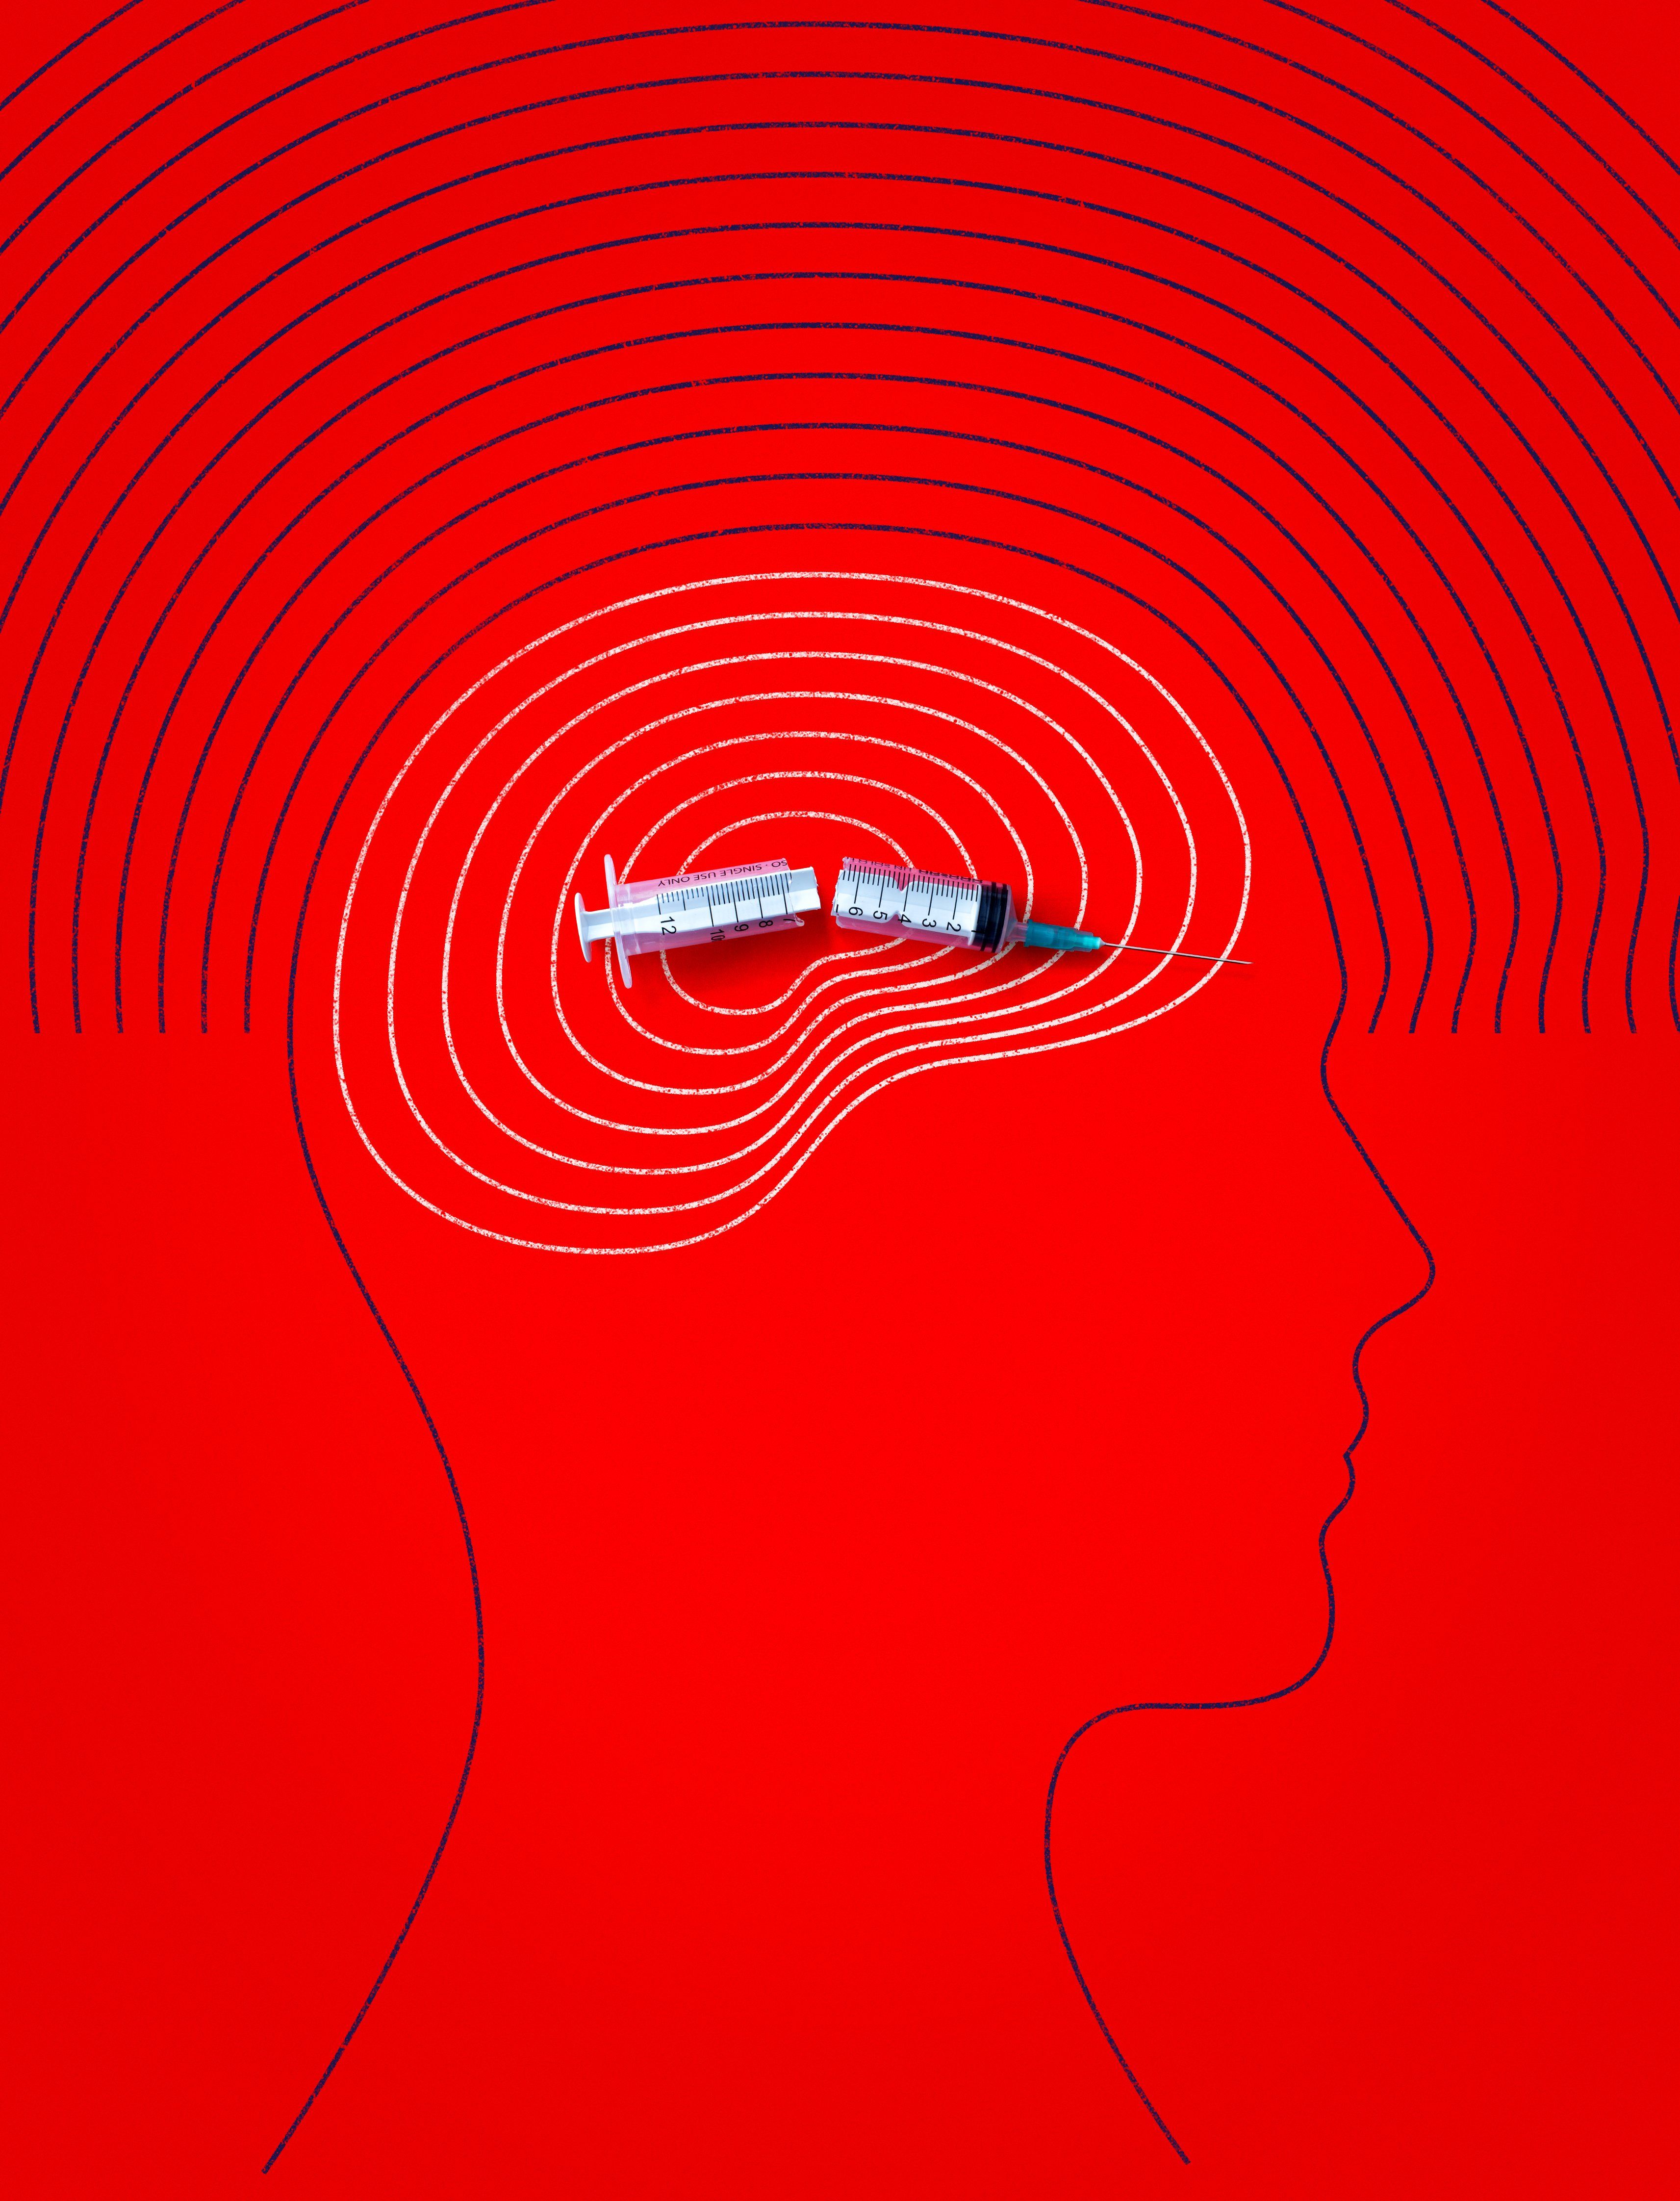 An illustration of person's head with a broken hypodermic needle.   